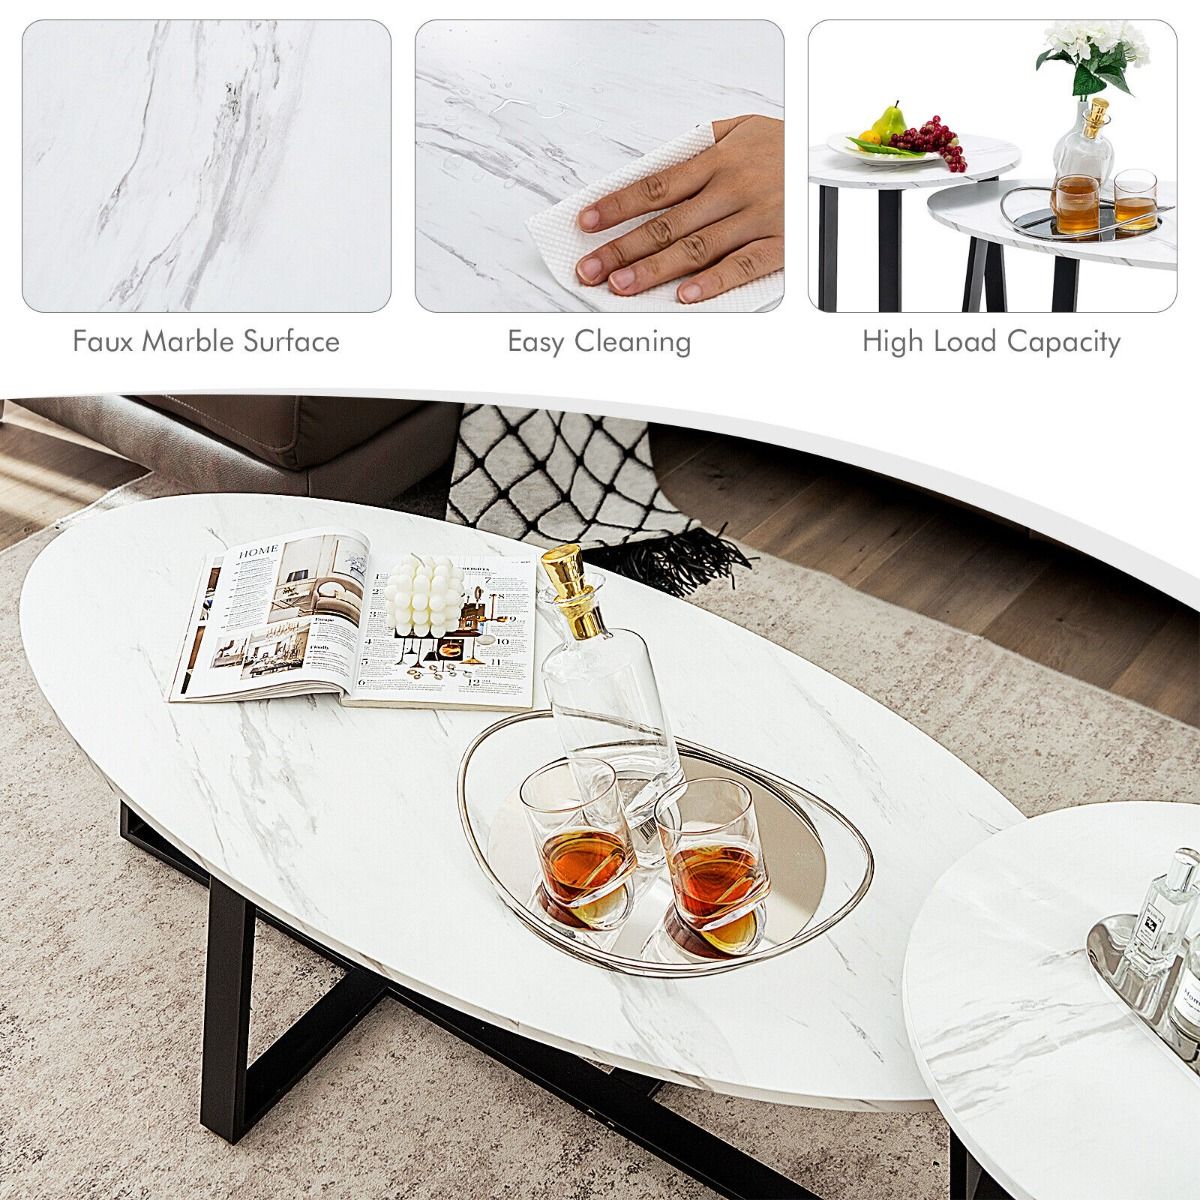 Set of 2 Modern Faux Marble Oval Round Coffee Table for Home Office